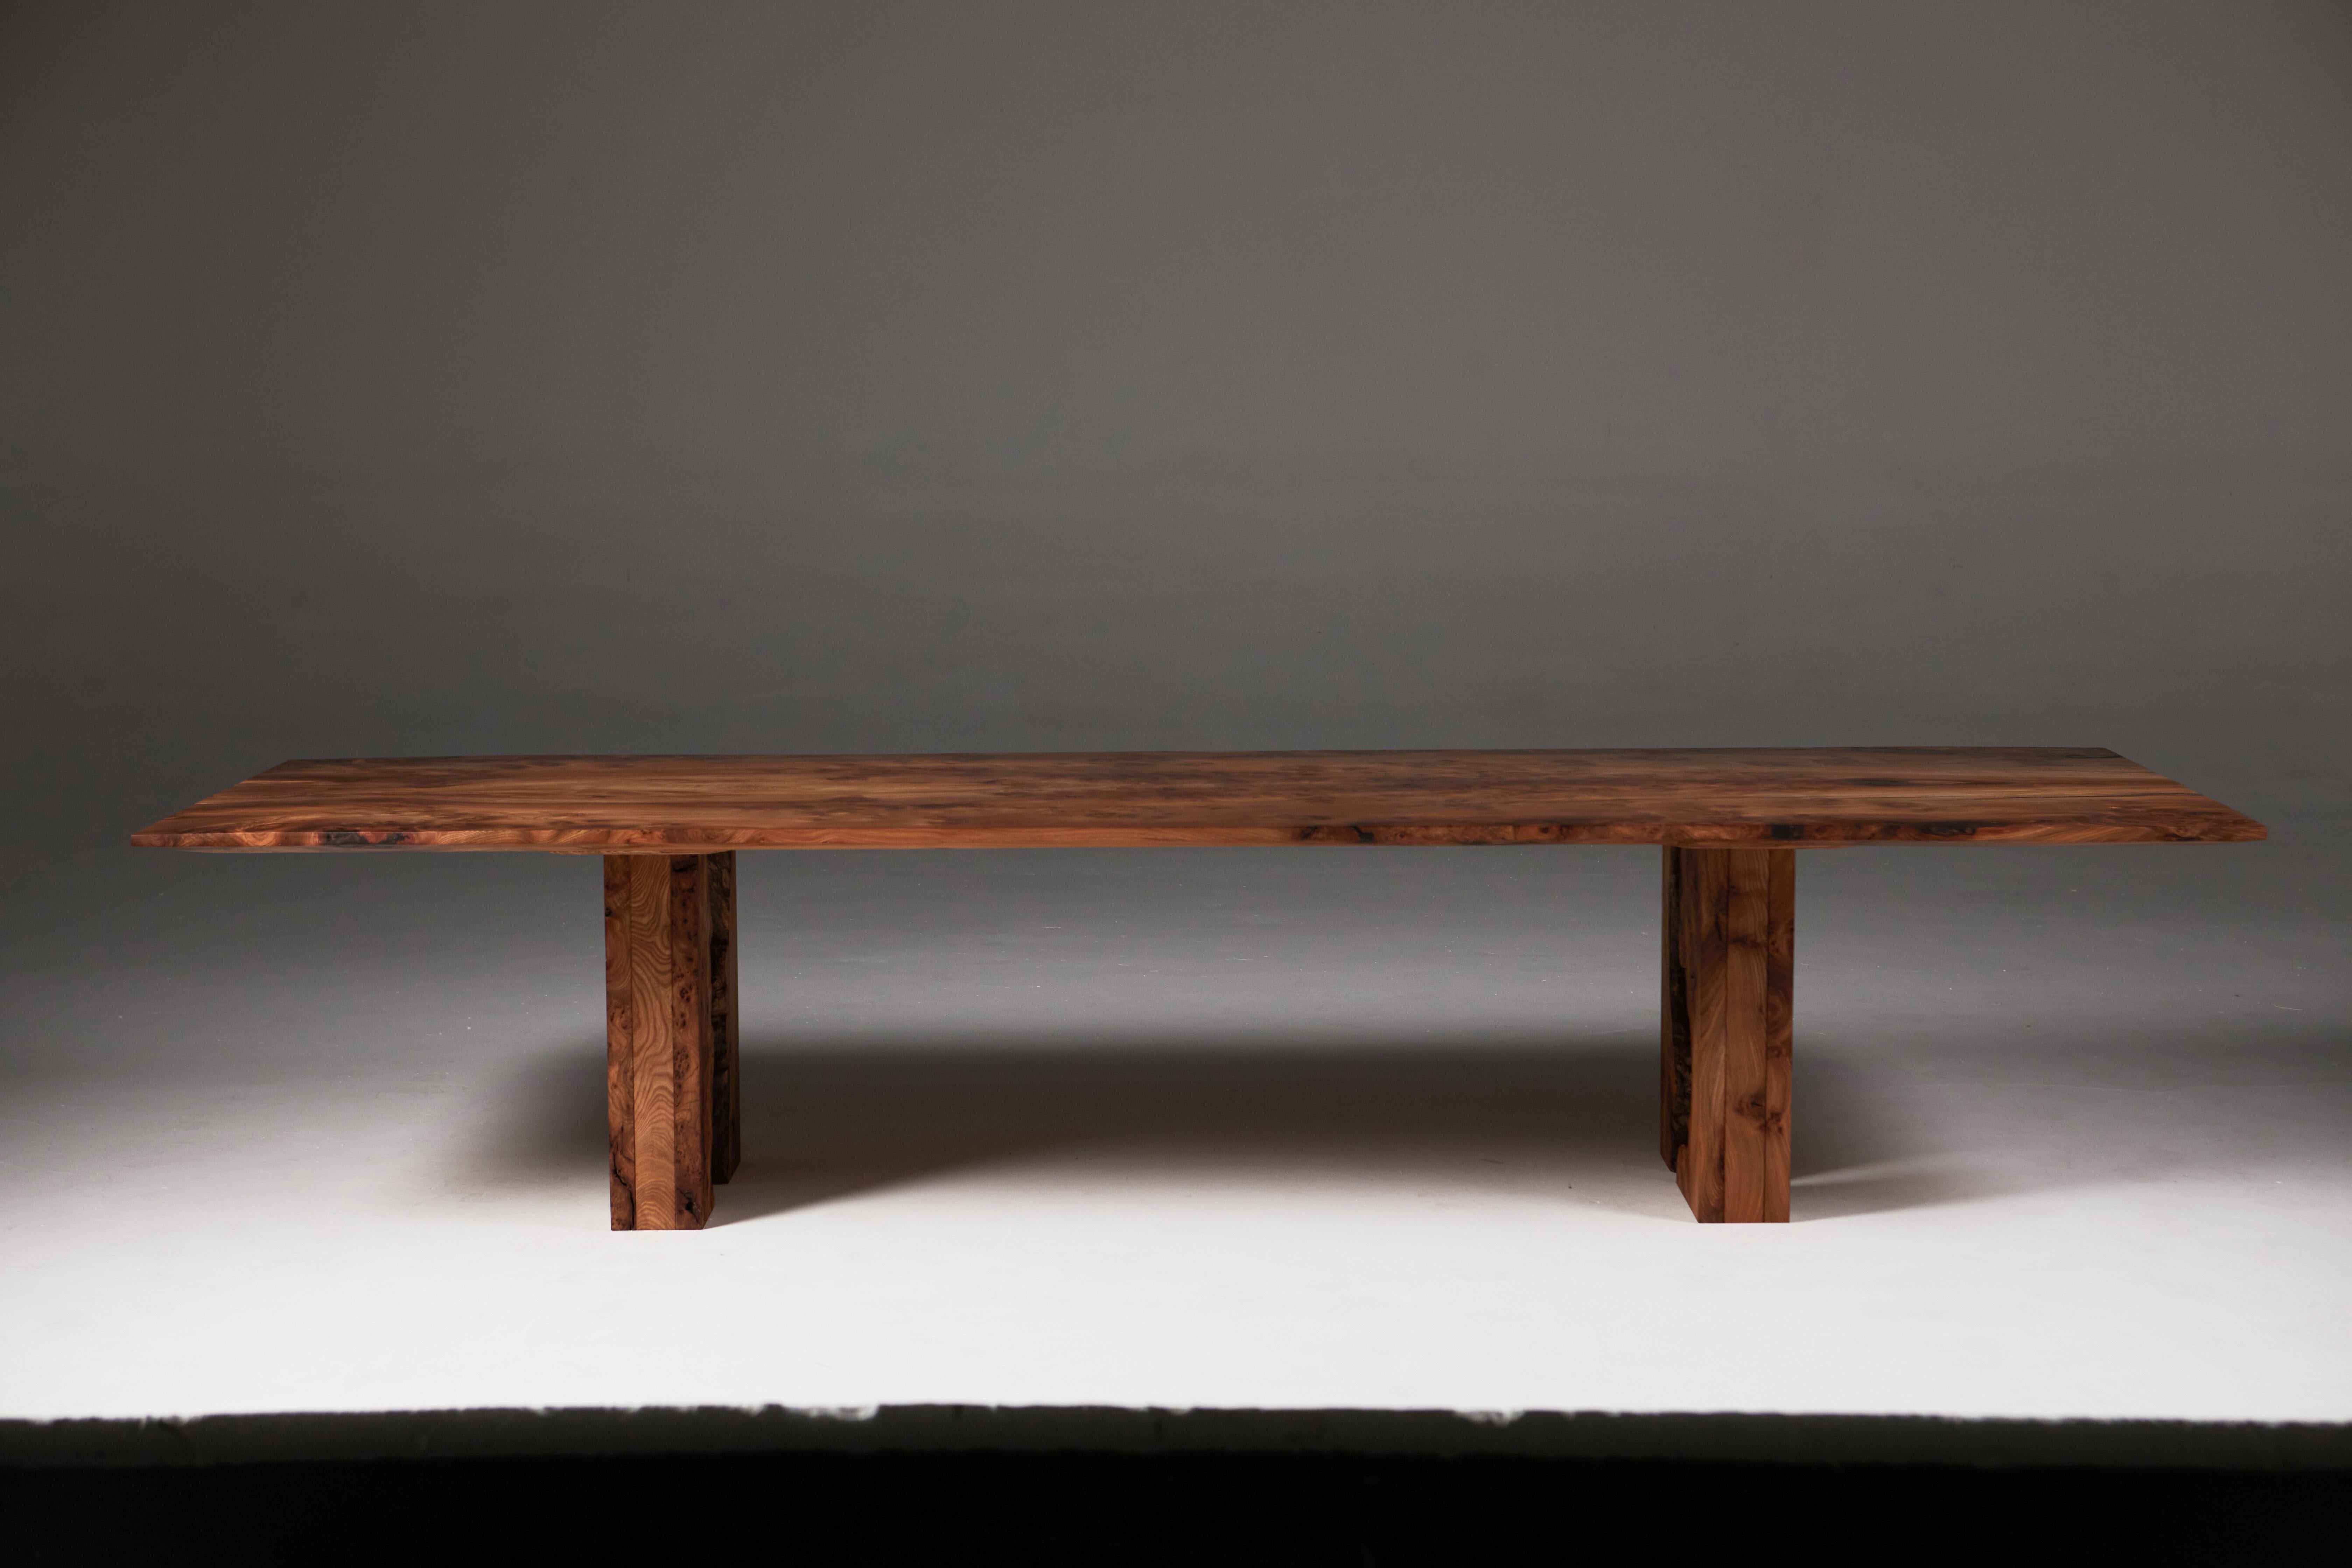 Scottish Burr Elm Table with Inverted Live Edge Legs and Book-matched Top.  6